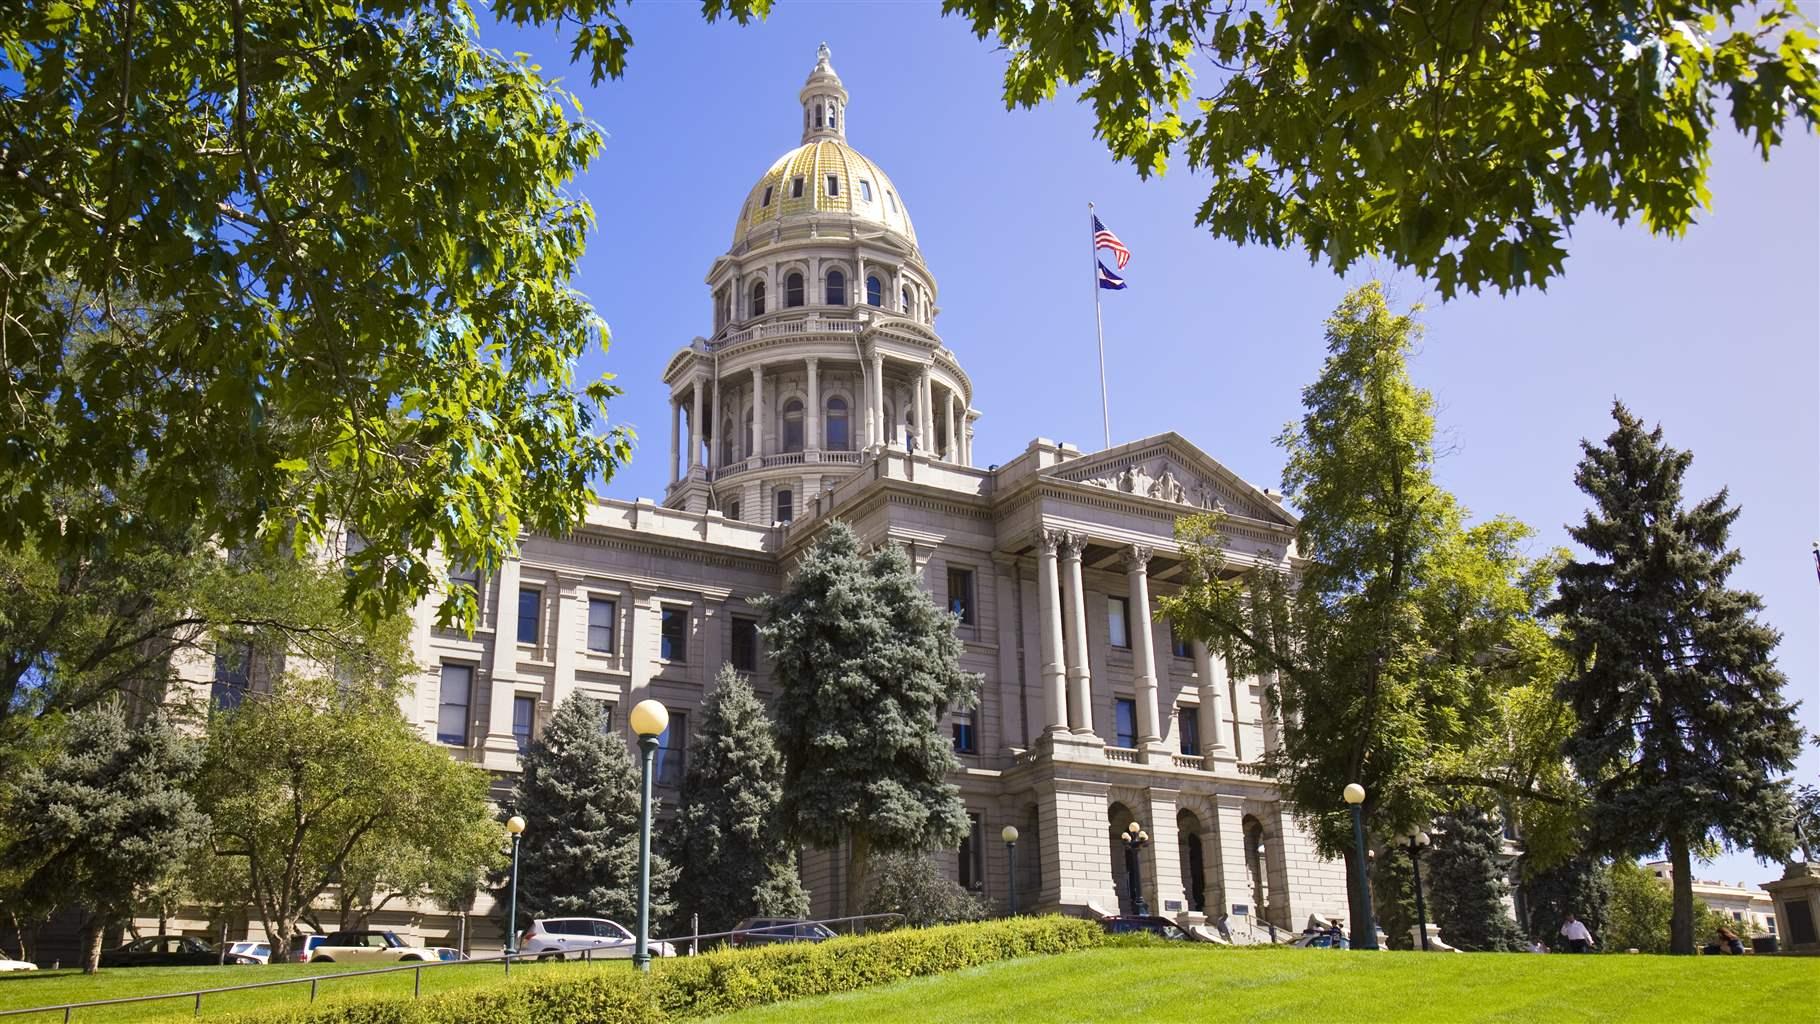 Modeled after the U.S. Capitol with its brilliant gold dome, the Colorado State Capitol offers free tours on weekdays. The Capitol's 13th step is exactly one mile above sea level, hence the nickname "Mile High City", Denver, CO, USA.